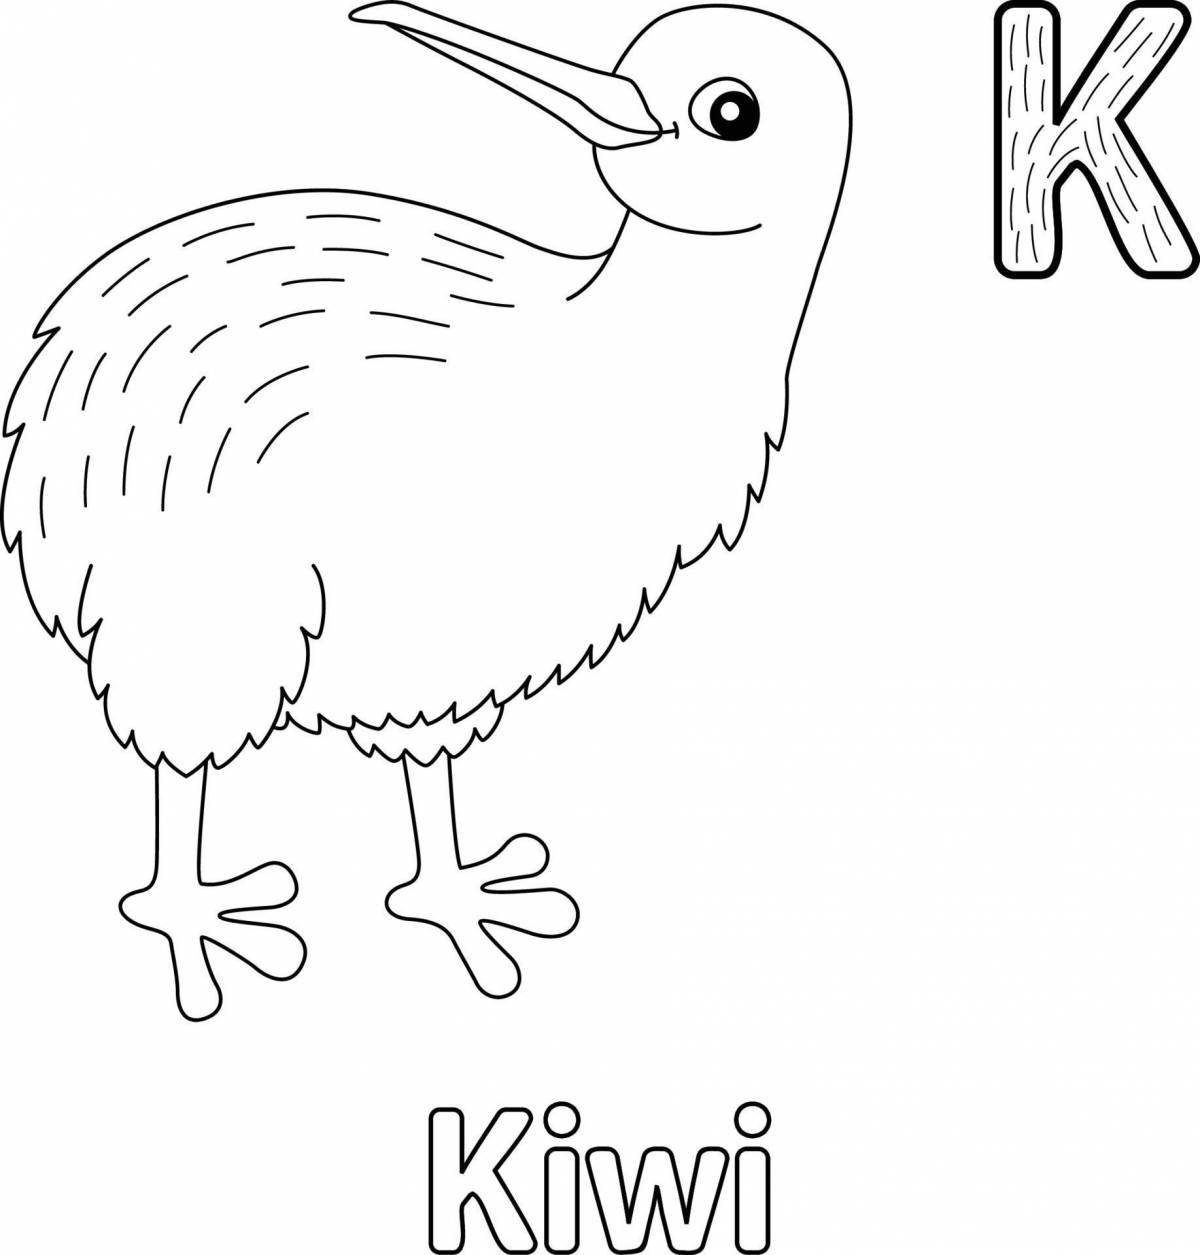 Kiwi willy funny coloring book